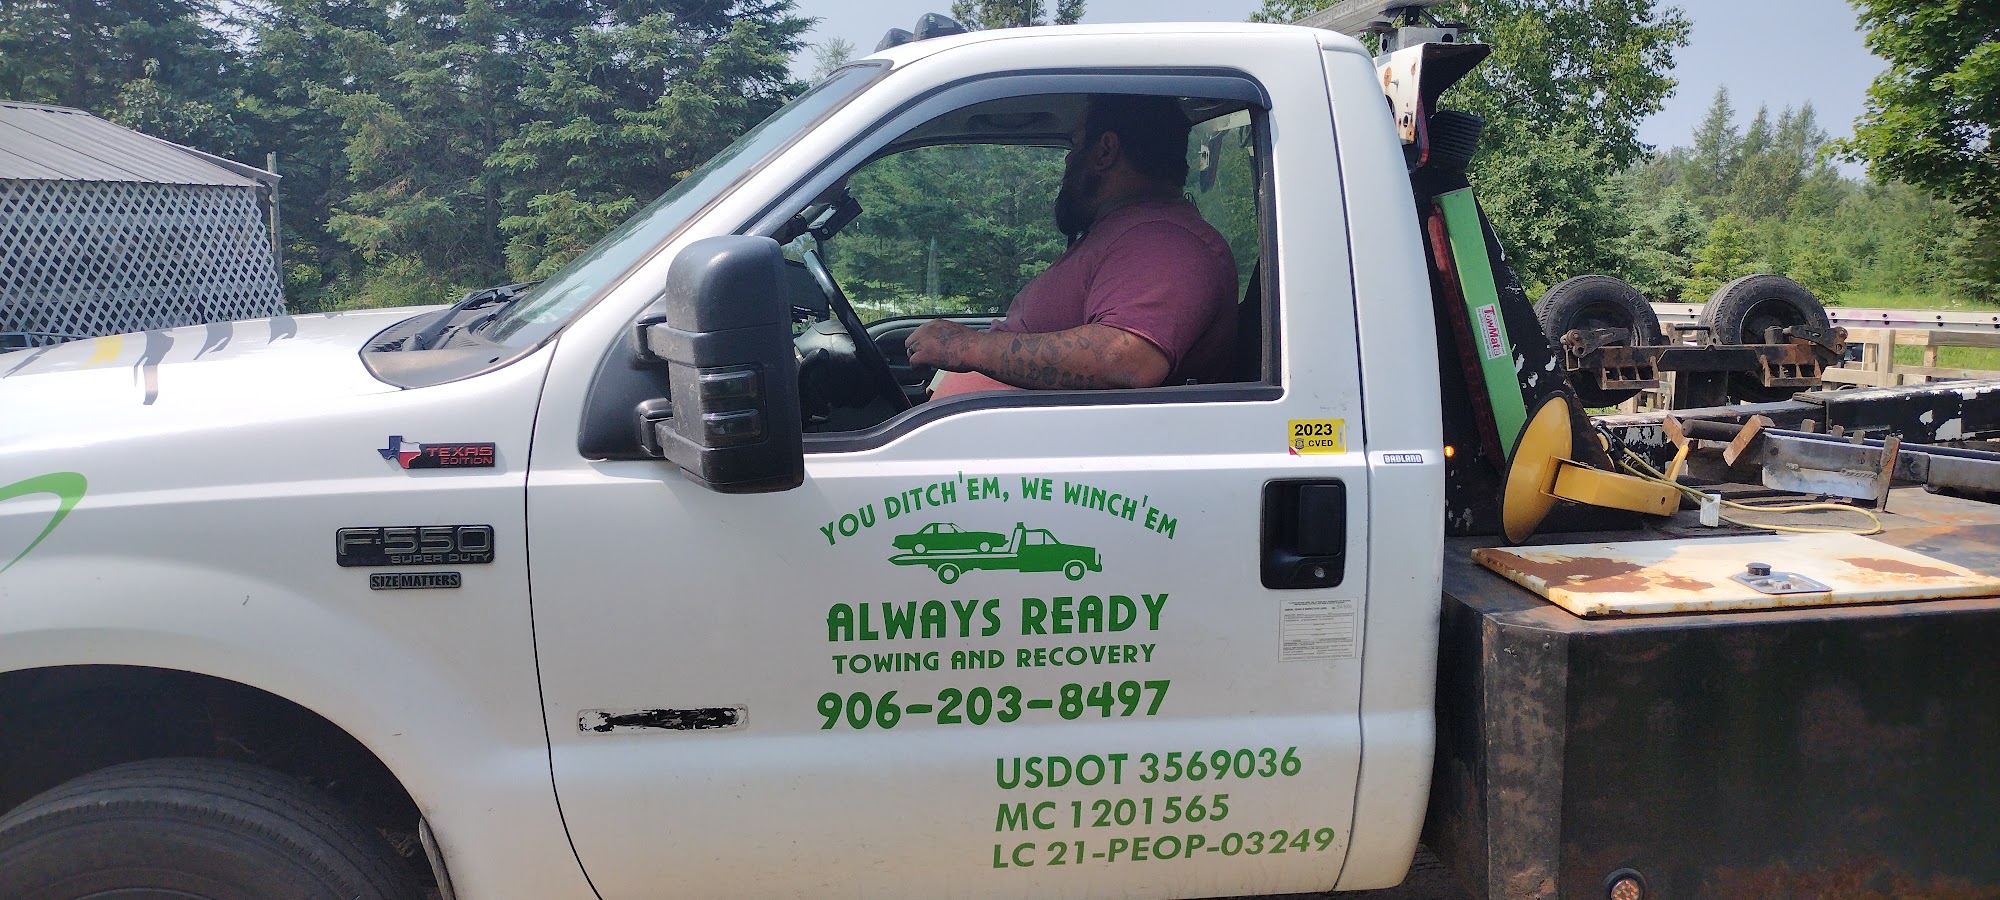 Always Ready Towing & Recovery llc